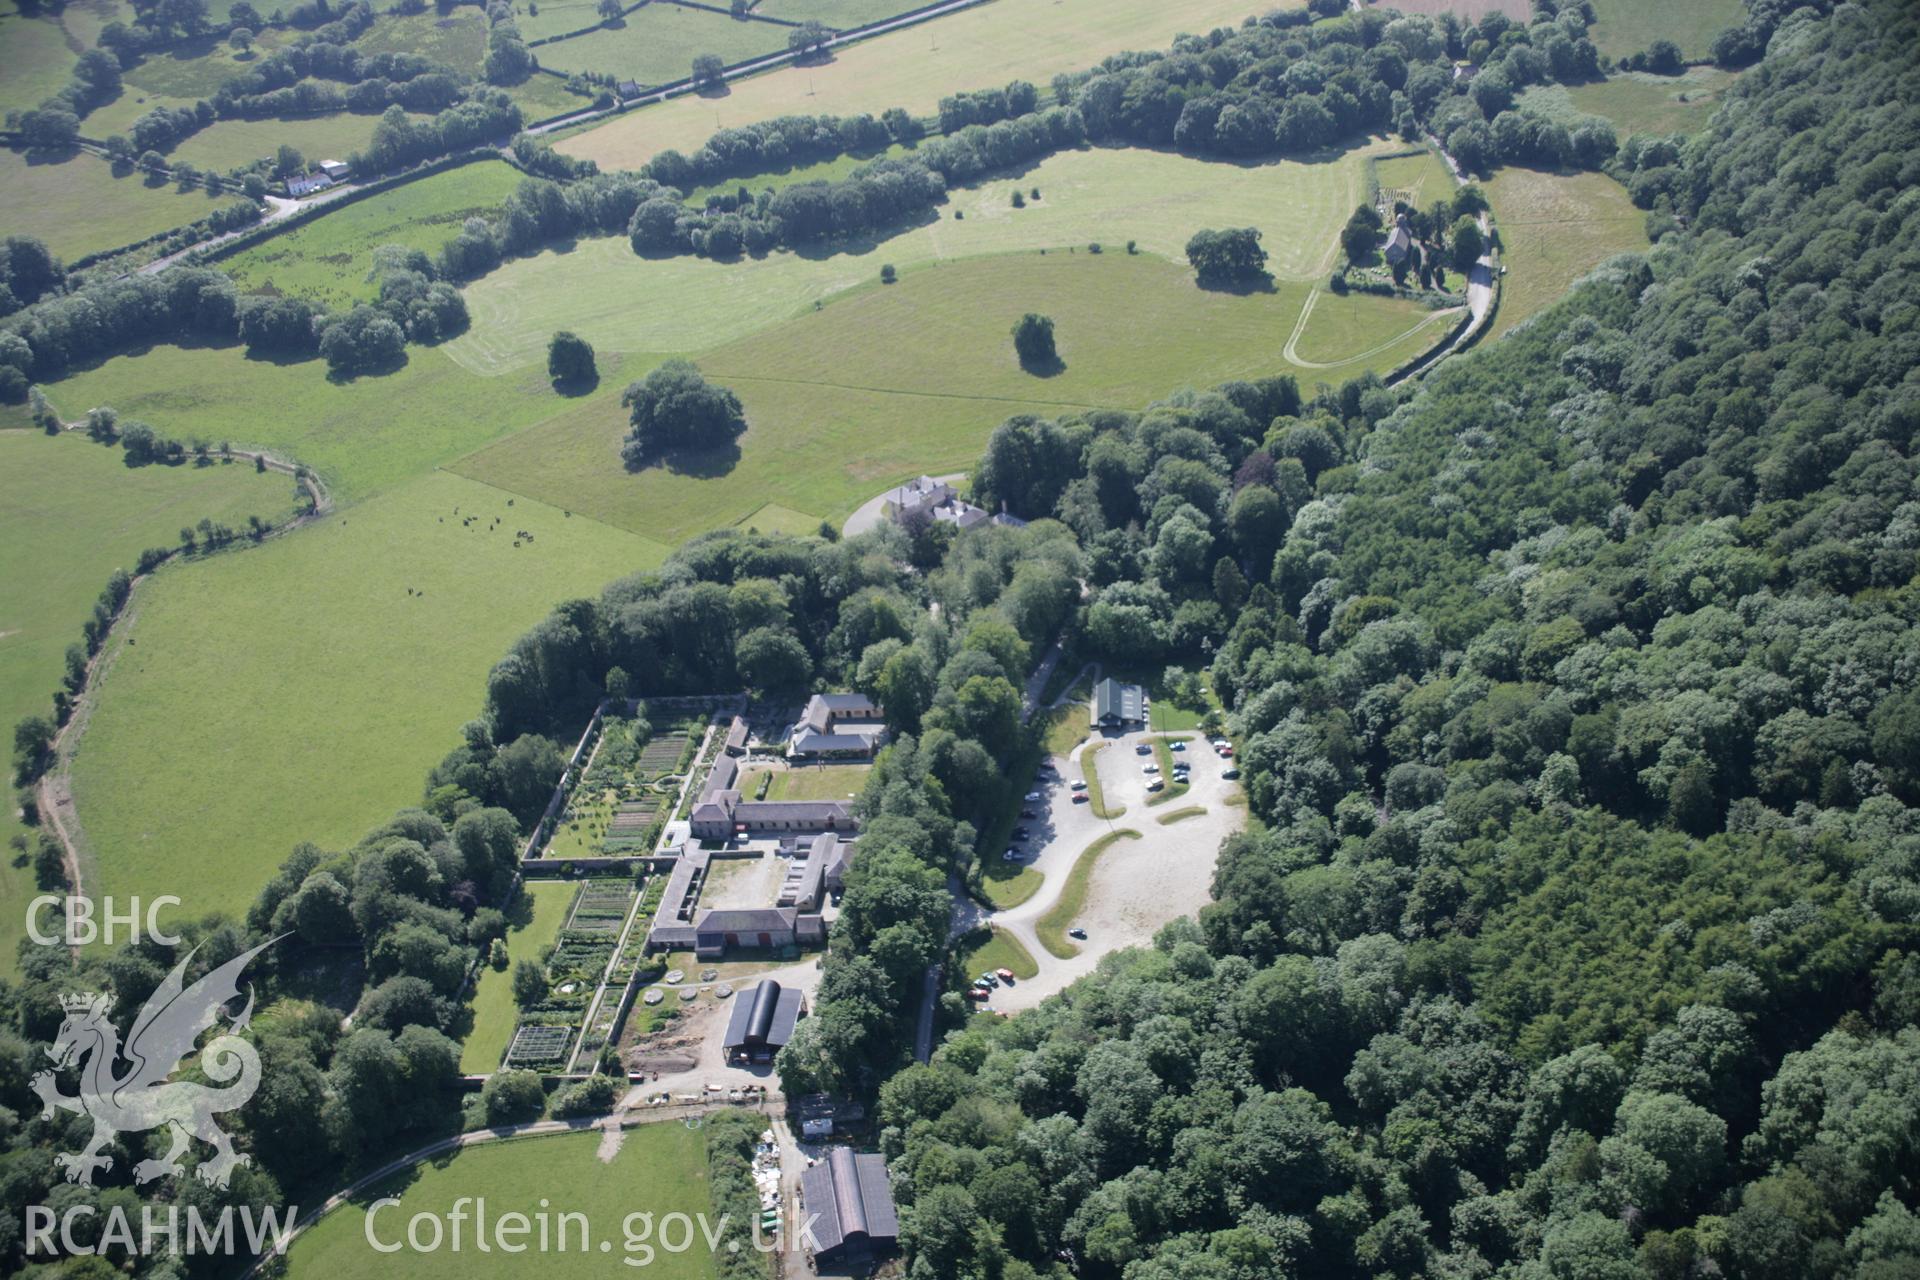 RCAHMW colour oblique aerial photograph of the garden at Llanerchaeronalso showing the house, from the north-east. Taken on 23 June 2005 by Toby Driver